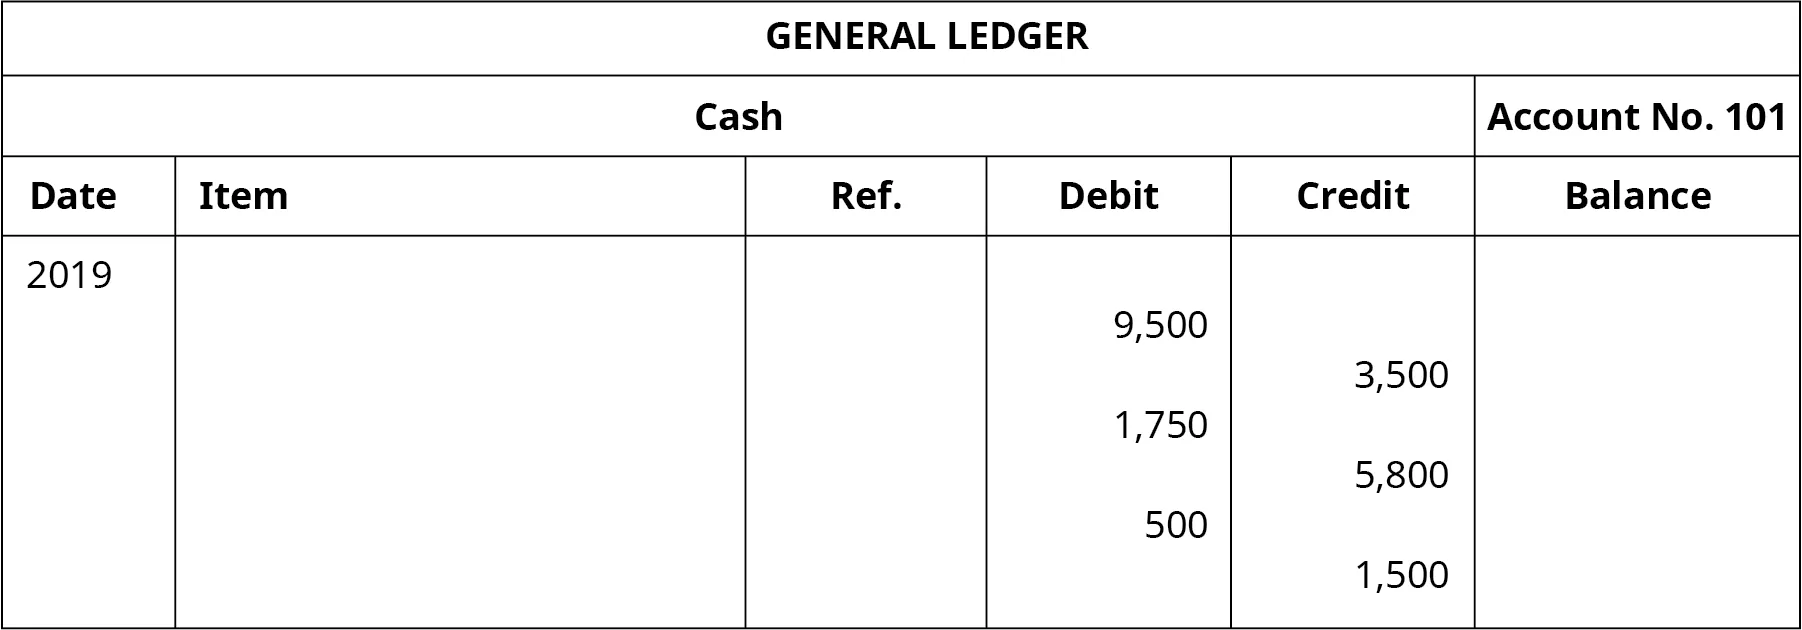 A General Ledger titled “Cash Account No. 101” with six columns. Date: 2019. Six columns labeled left to right: Date, Item, Reference, Debit, Credit, Balance. Debit: 9,500; Balance: 9,500. Credit: 3,500; Balance: 6,000. Debit: 1,750; Balance: 7,750. Credit: 5,800; Balance: 1,950. Debit: 500; Balance: 2,450. Credit: 1,500; Balance: 950. 